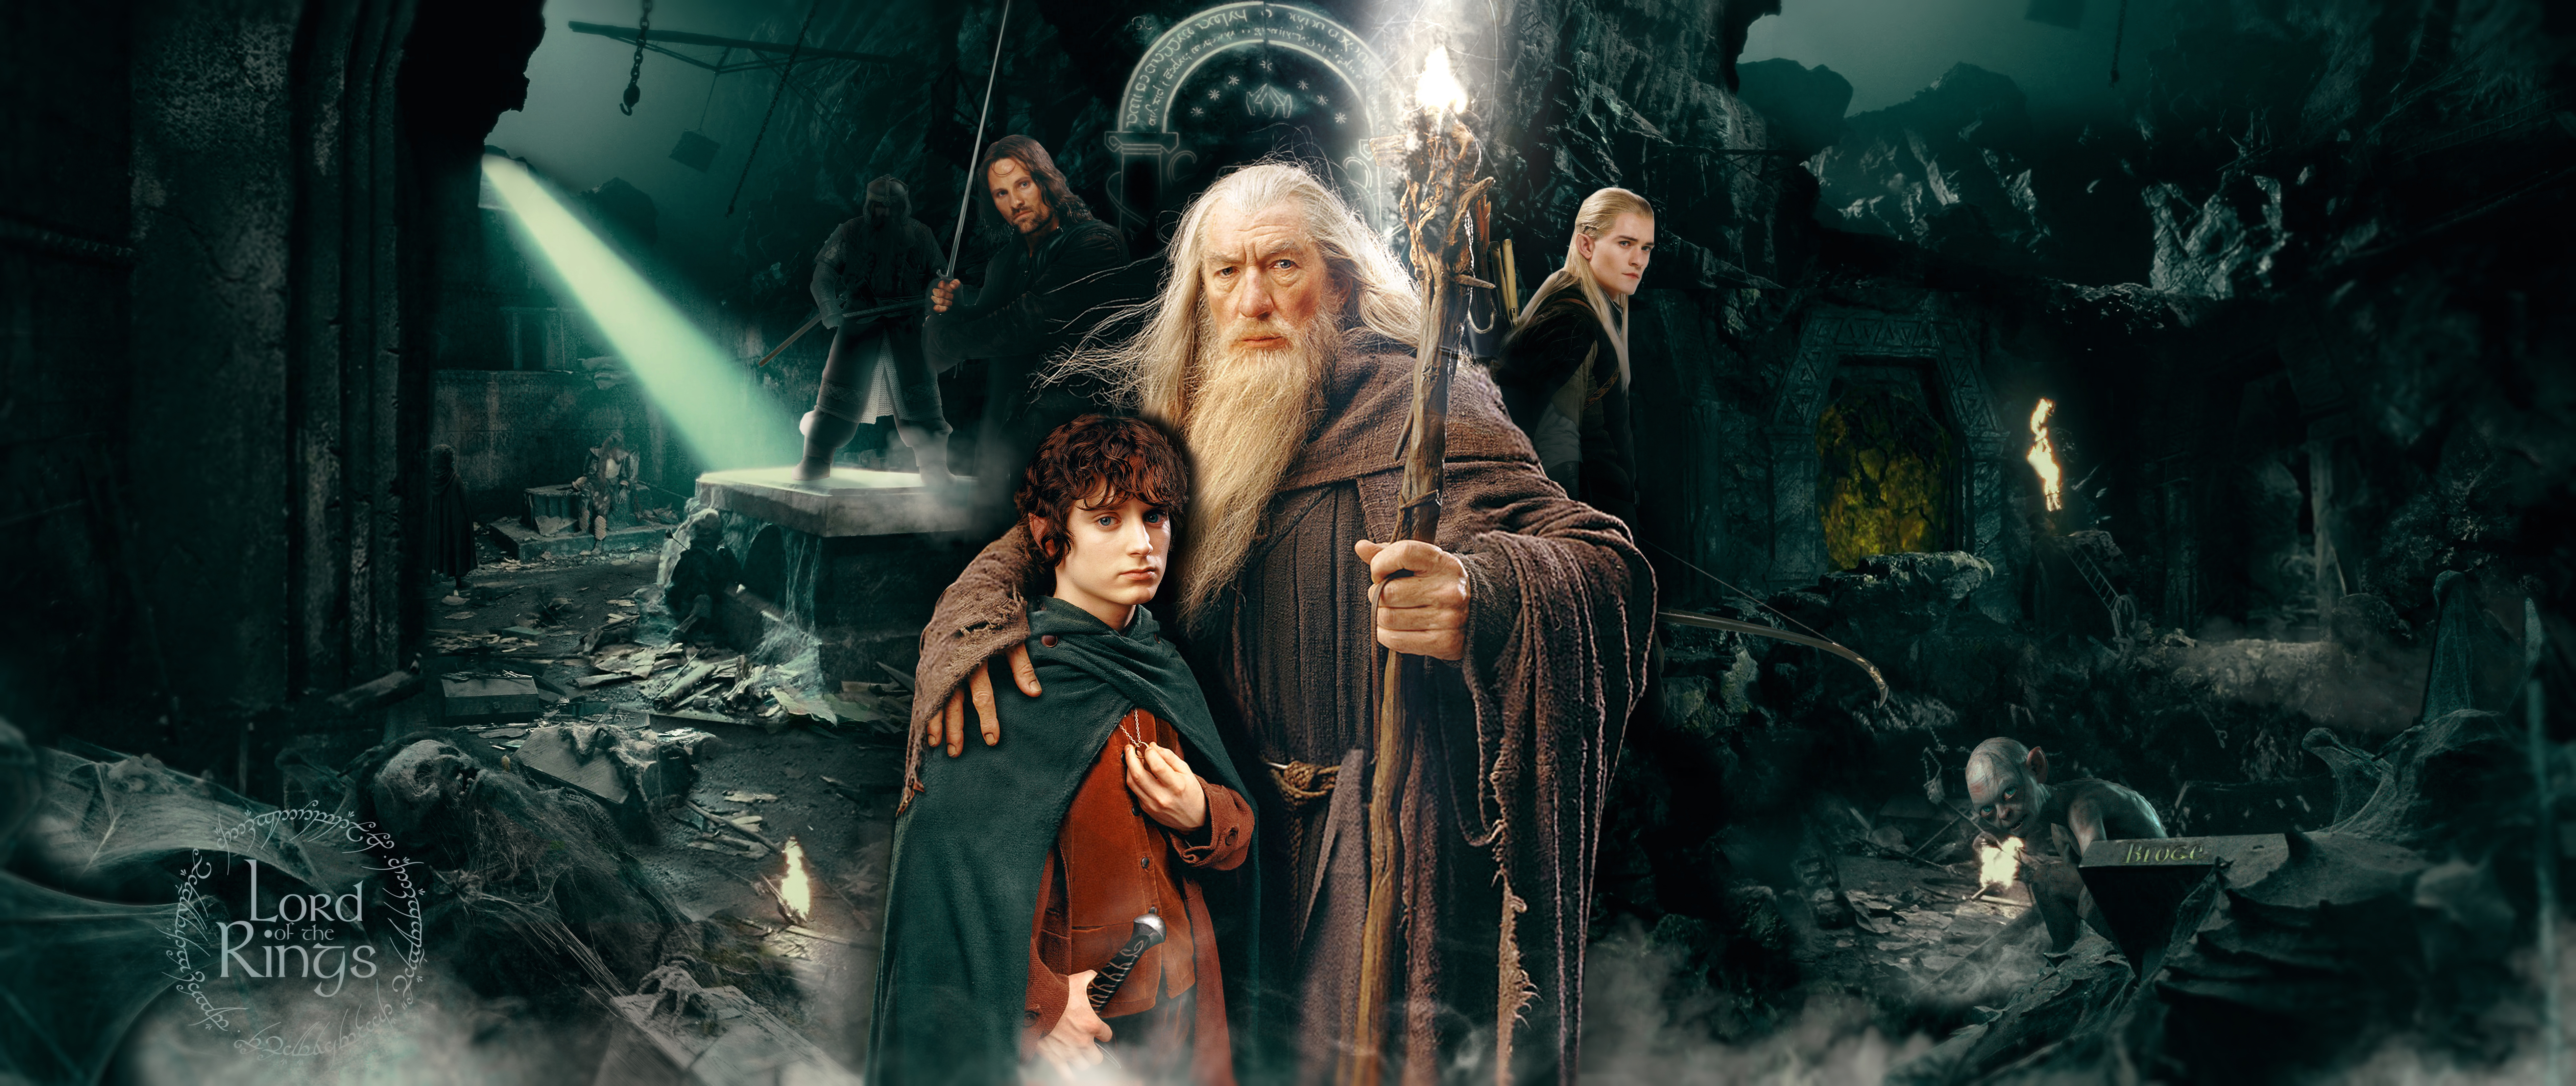 Movie The Lord Of The Rings HD Wallpaper | Background Image